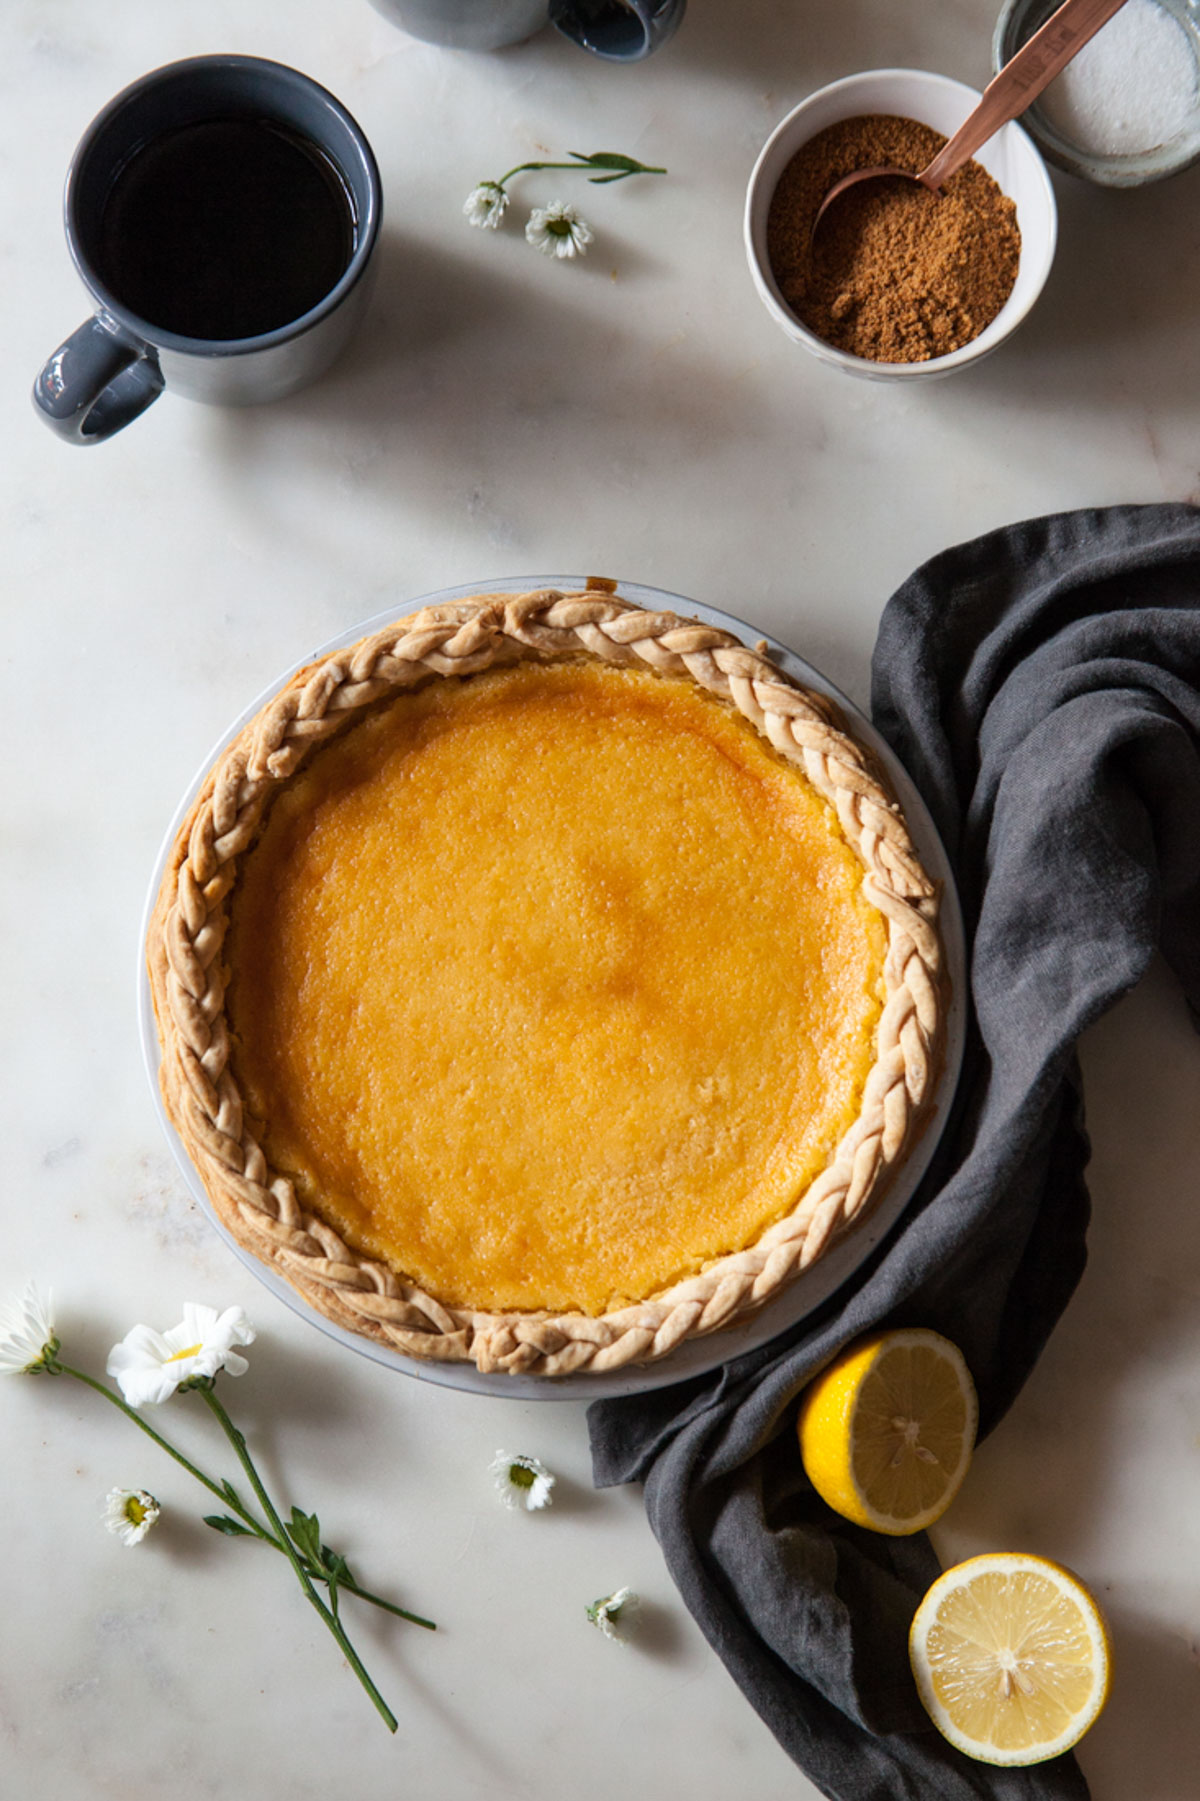 A baked lemon chess pie with a braided pie crust